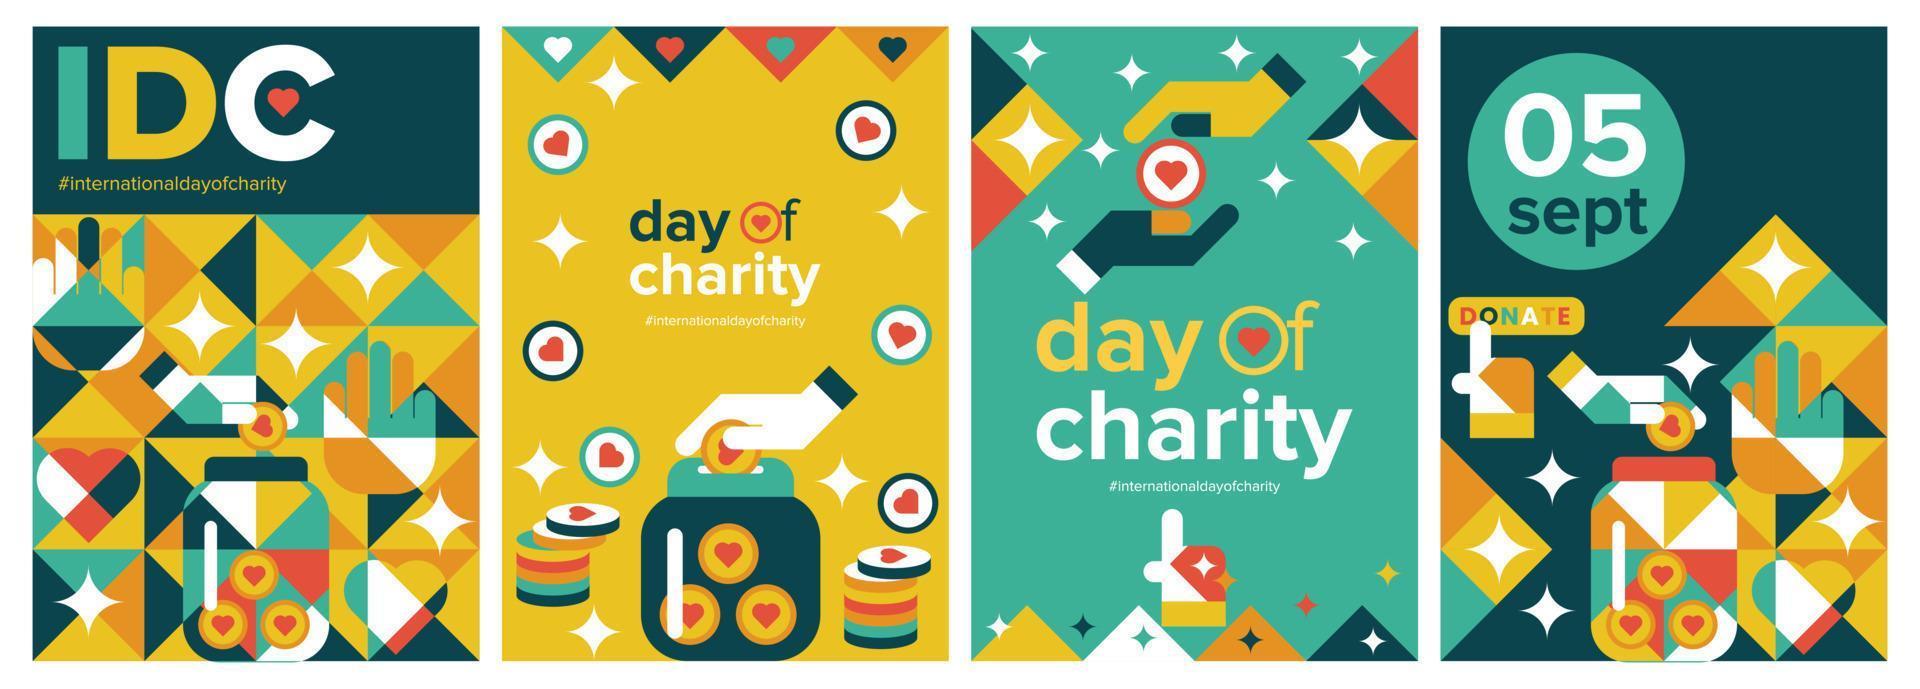 International day of charity greeting card vector collection set